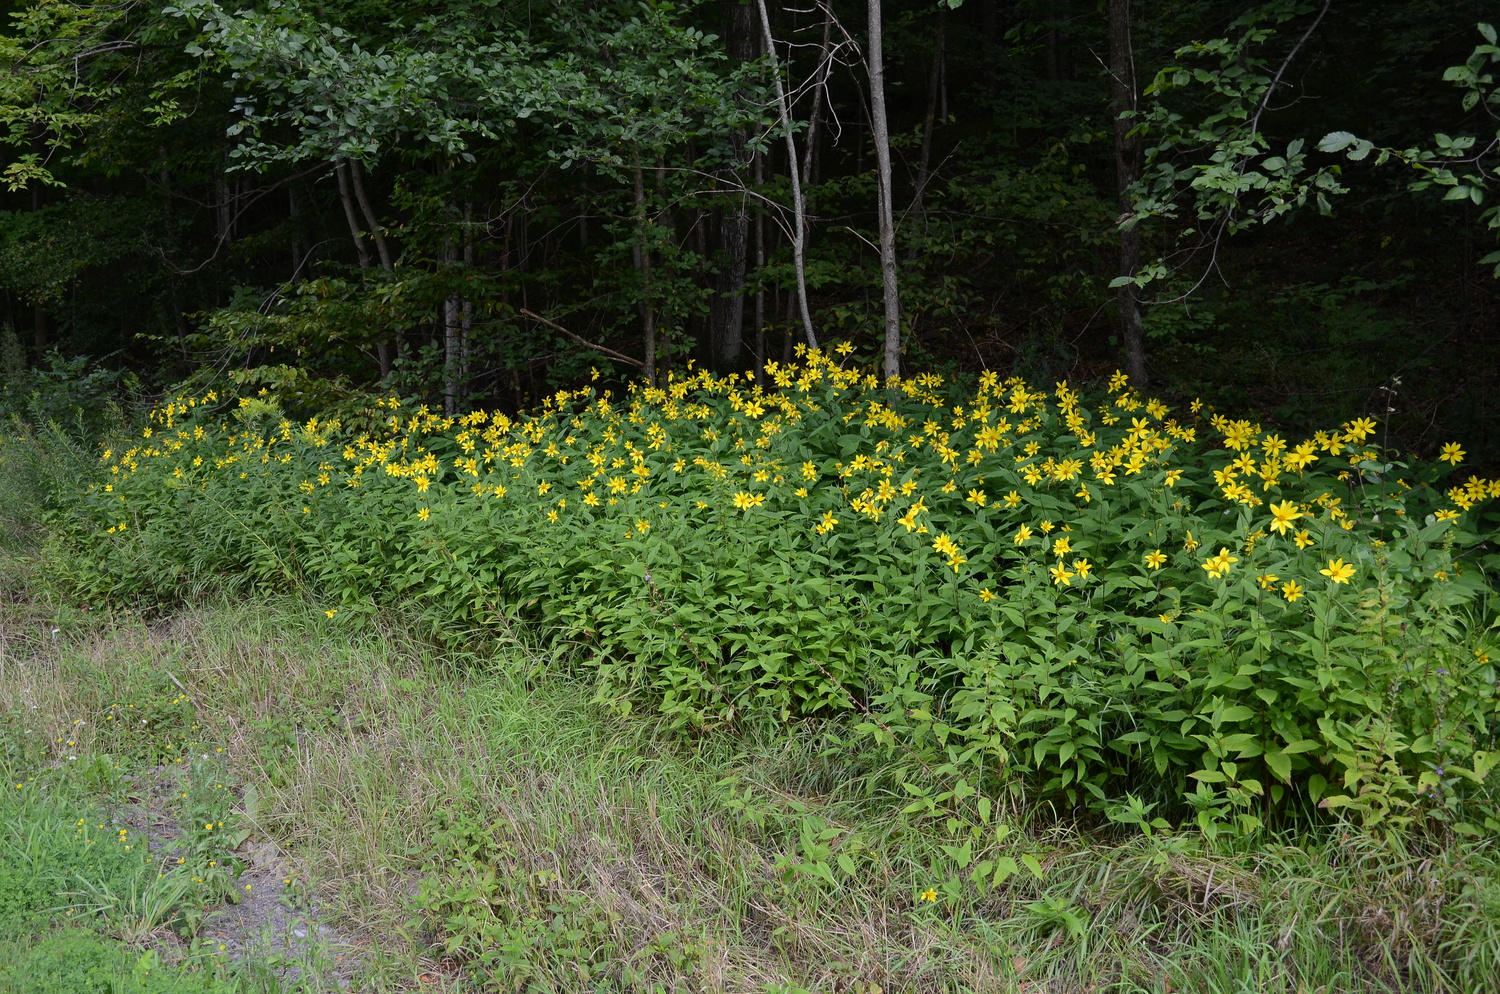 Helianthus tuberosa, our true, native sunflower, is also grown for its edible tubers. This roadside colony shows the density of the foliage as well as the bright yellow sunflowers that actually track the sun. A great naturalizer, it should not be planted in formal garden areas due to its sprawling habit.  ANDREW MESSINGER